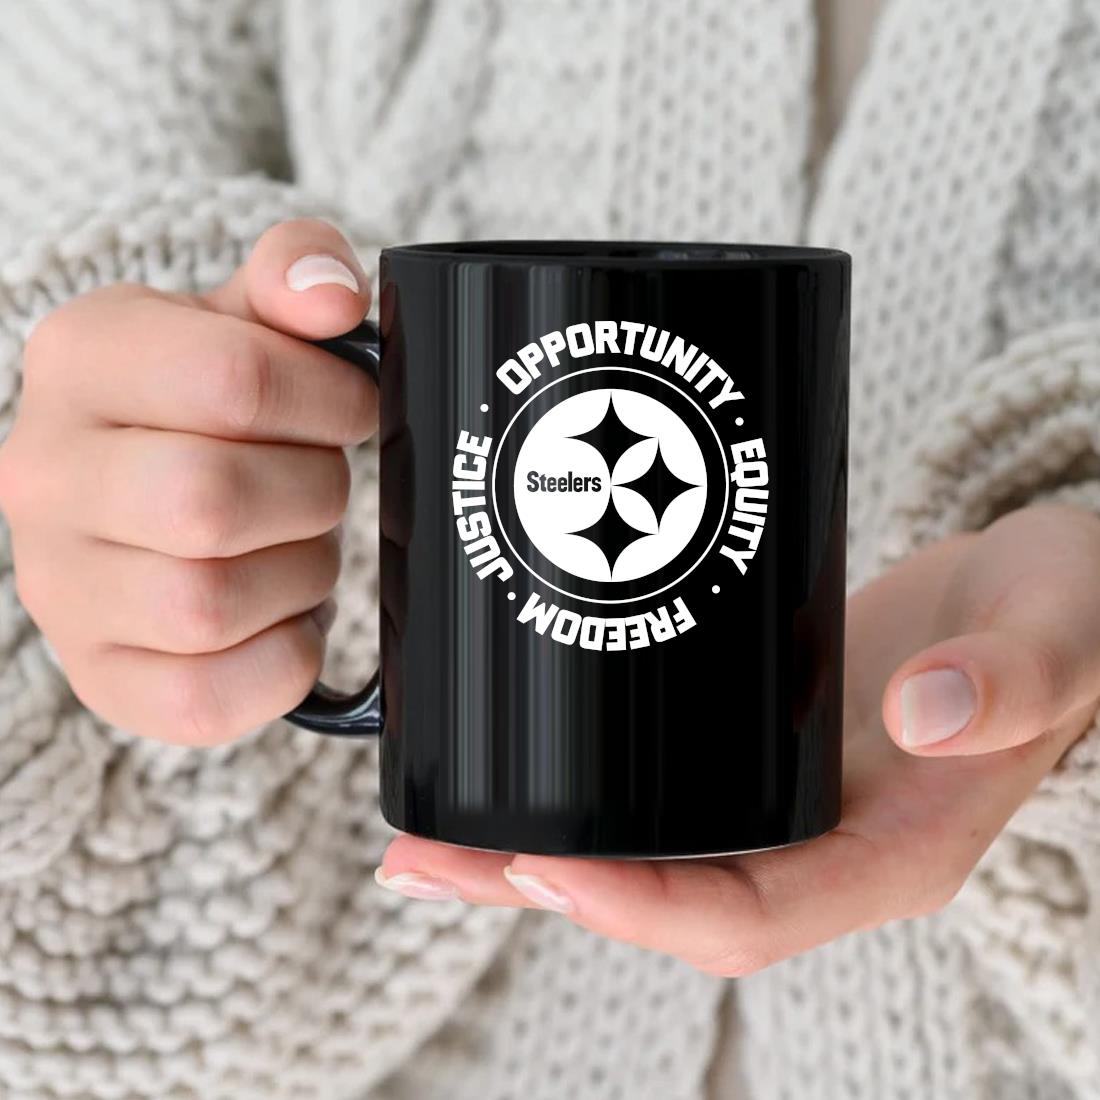 Official Opportunity Equity Freedom Justice Steelers Mug